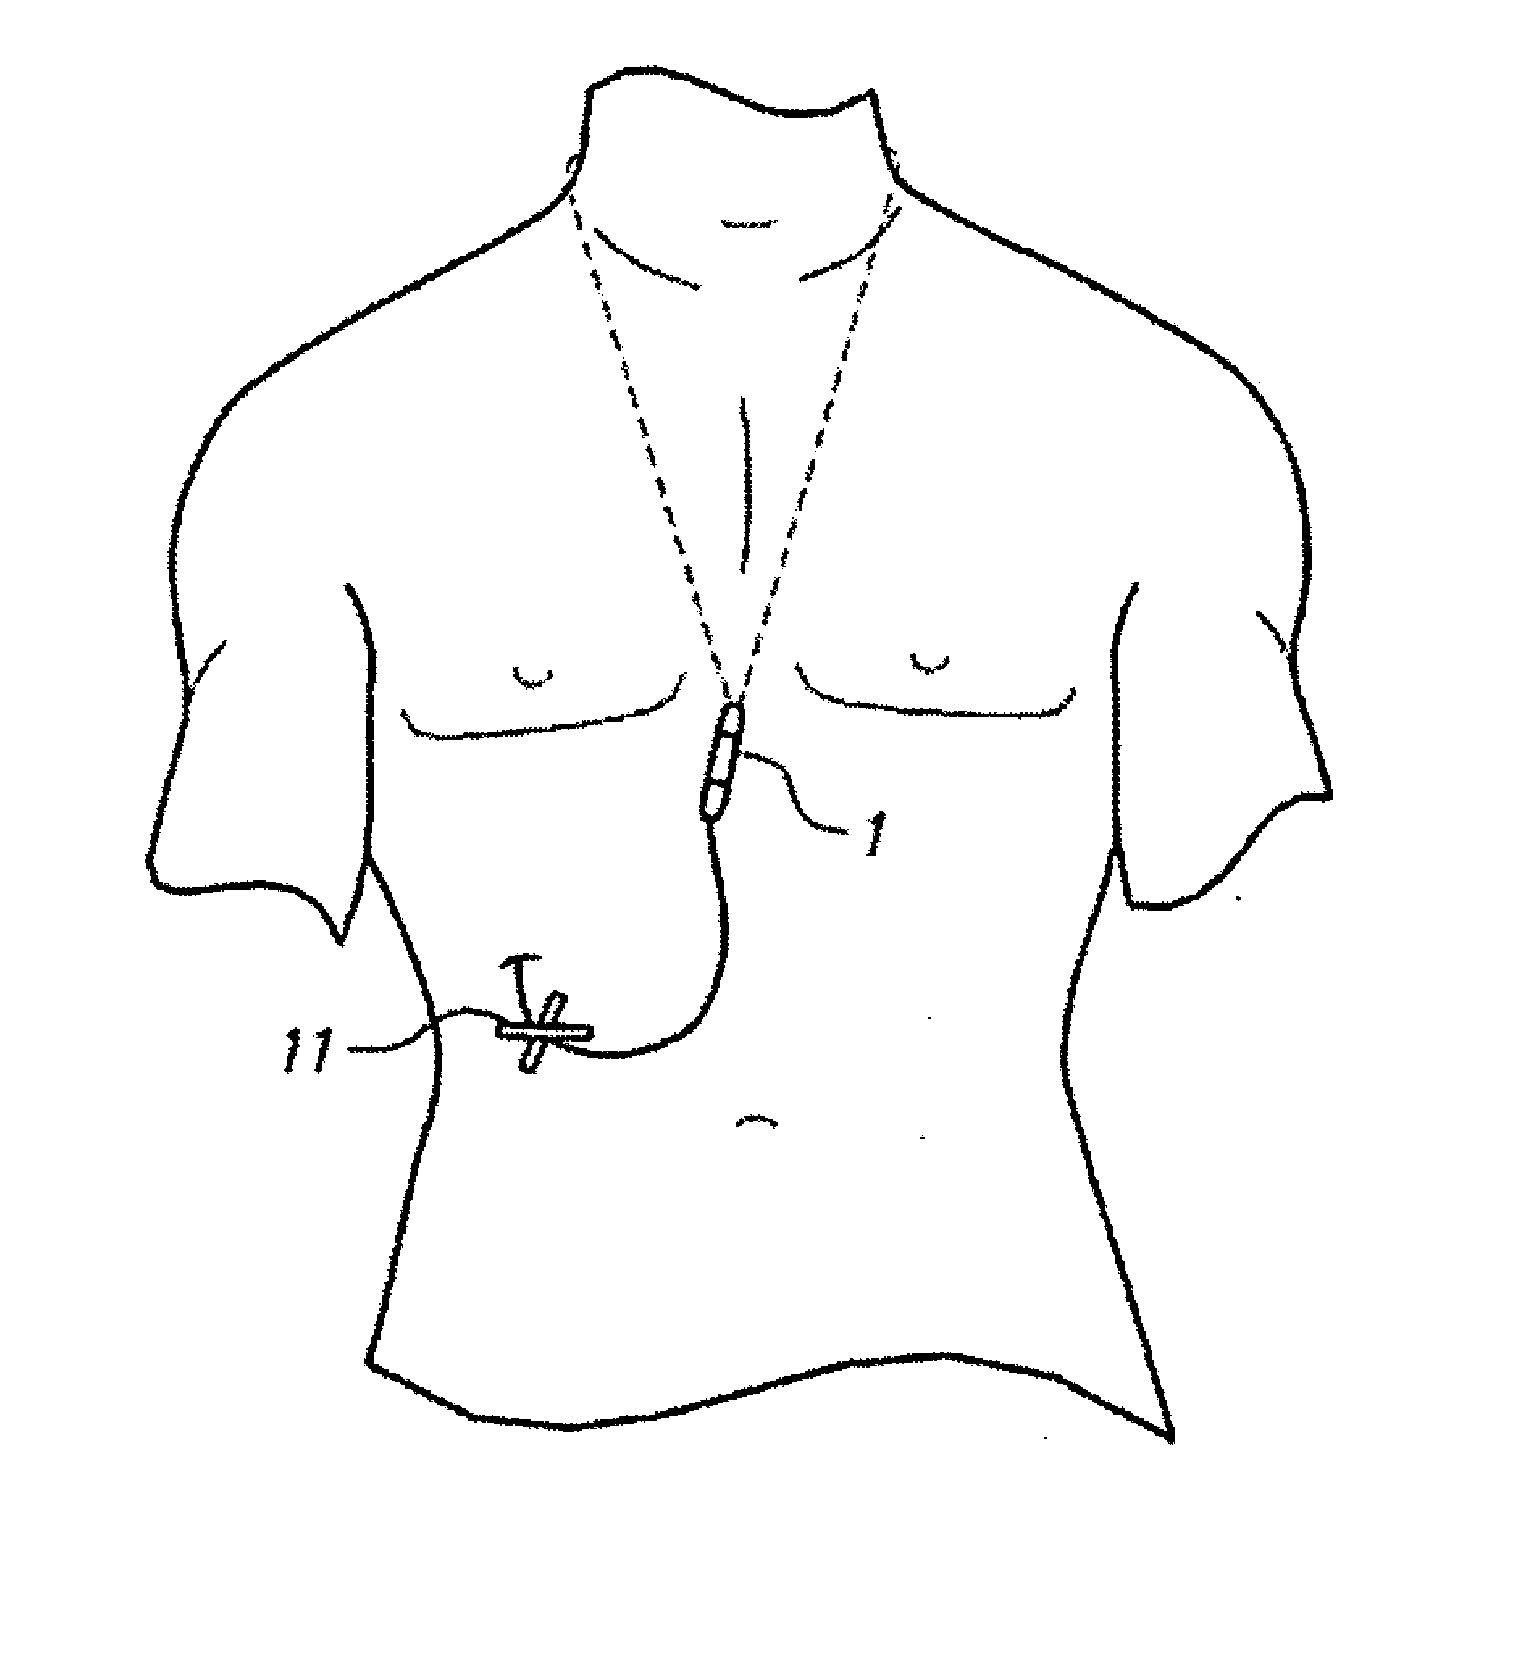 User wearable device for carrying peritoneal dialysis catheter